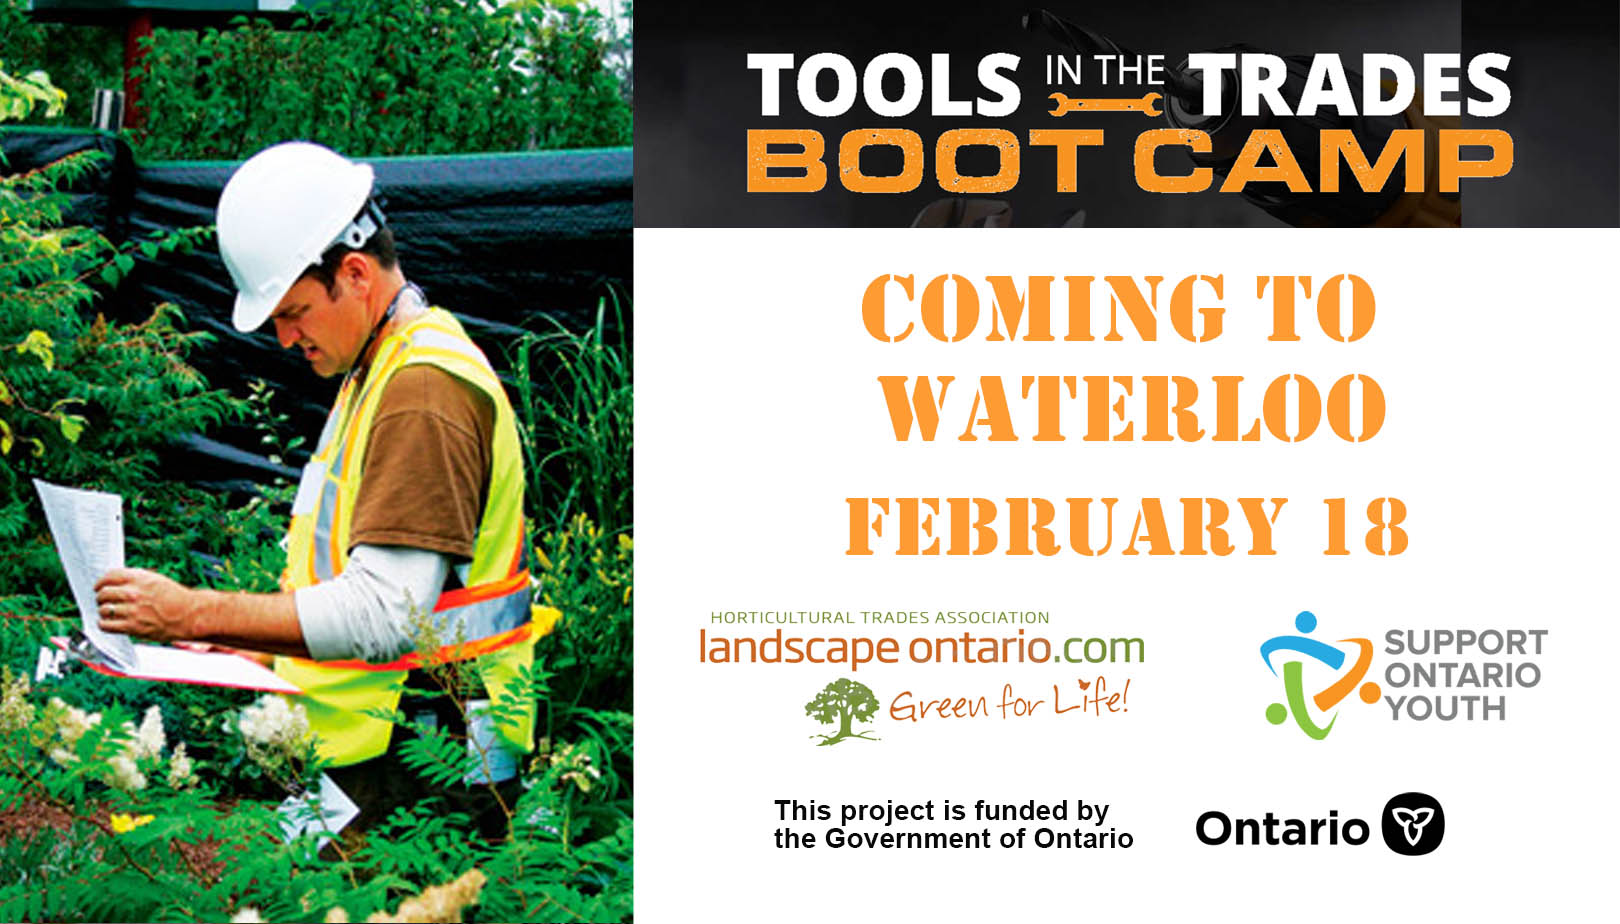 Tools in the Trades Boot Camp - Waterloo